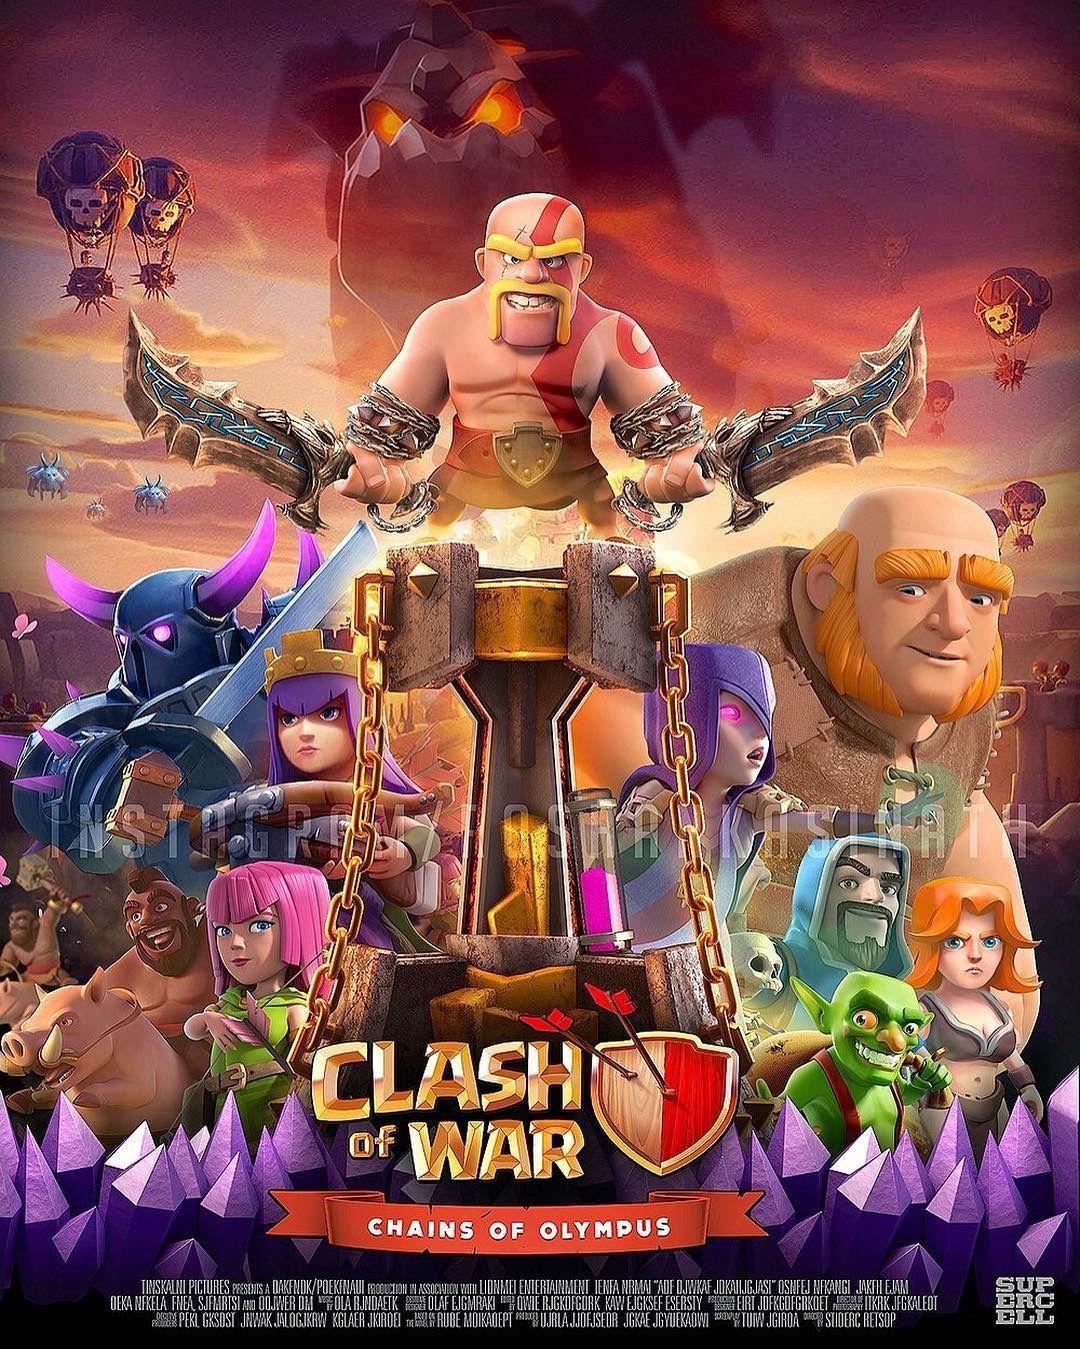 Clash of clans. Clash of Clans. Clash royale, Gaming